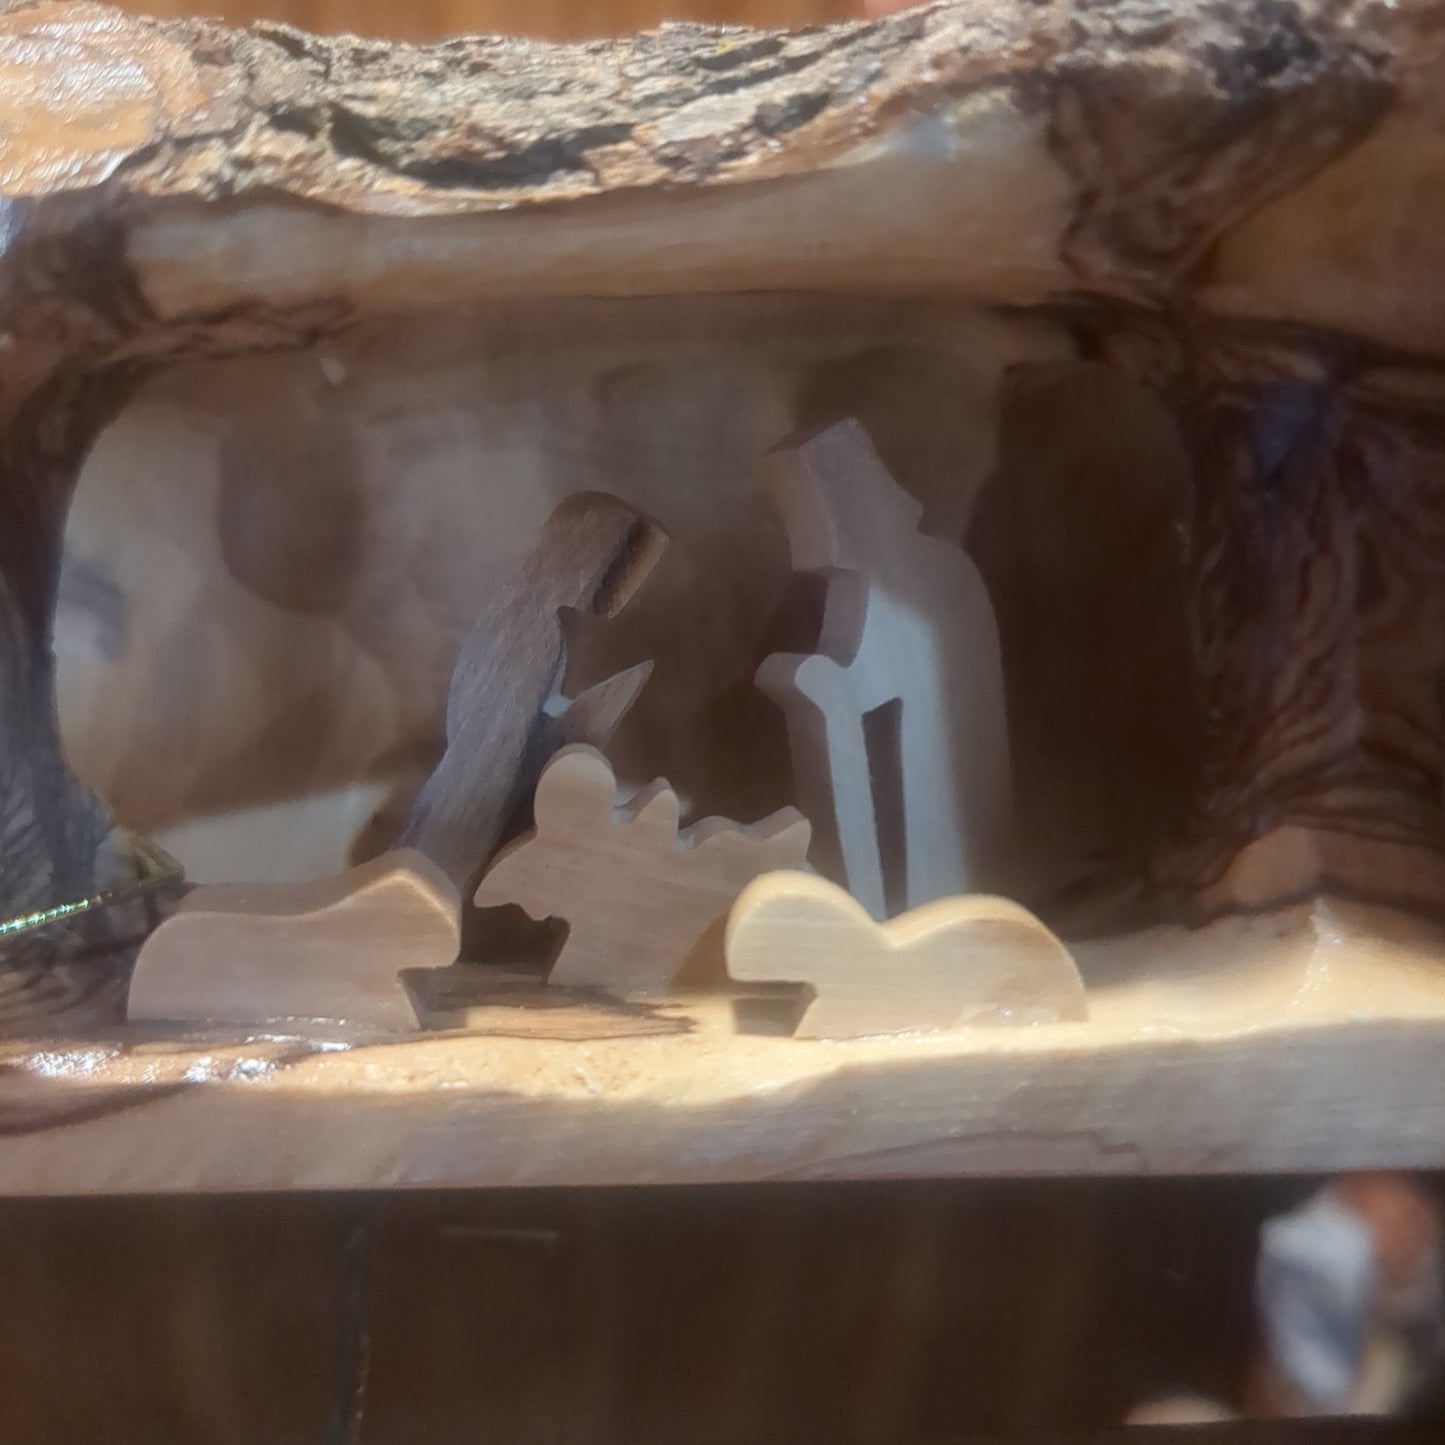 Small Grotto carved in olive wood Branch - 3"x5"